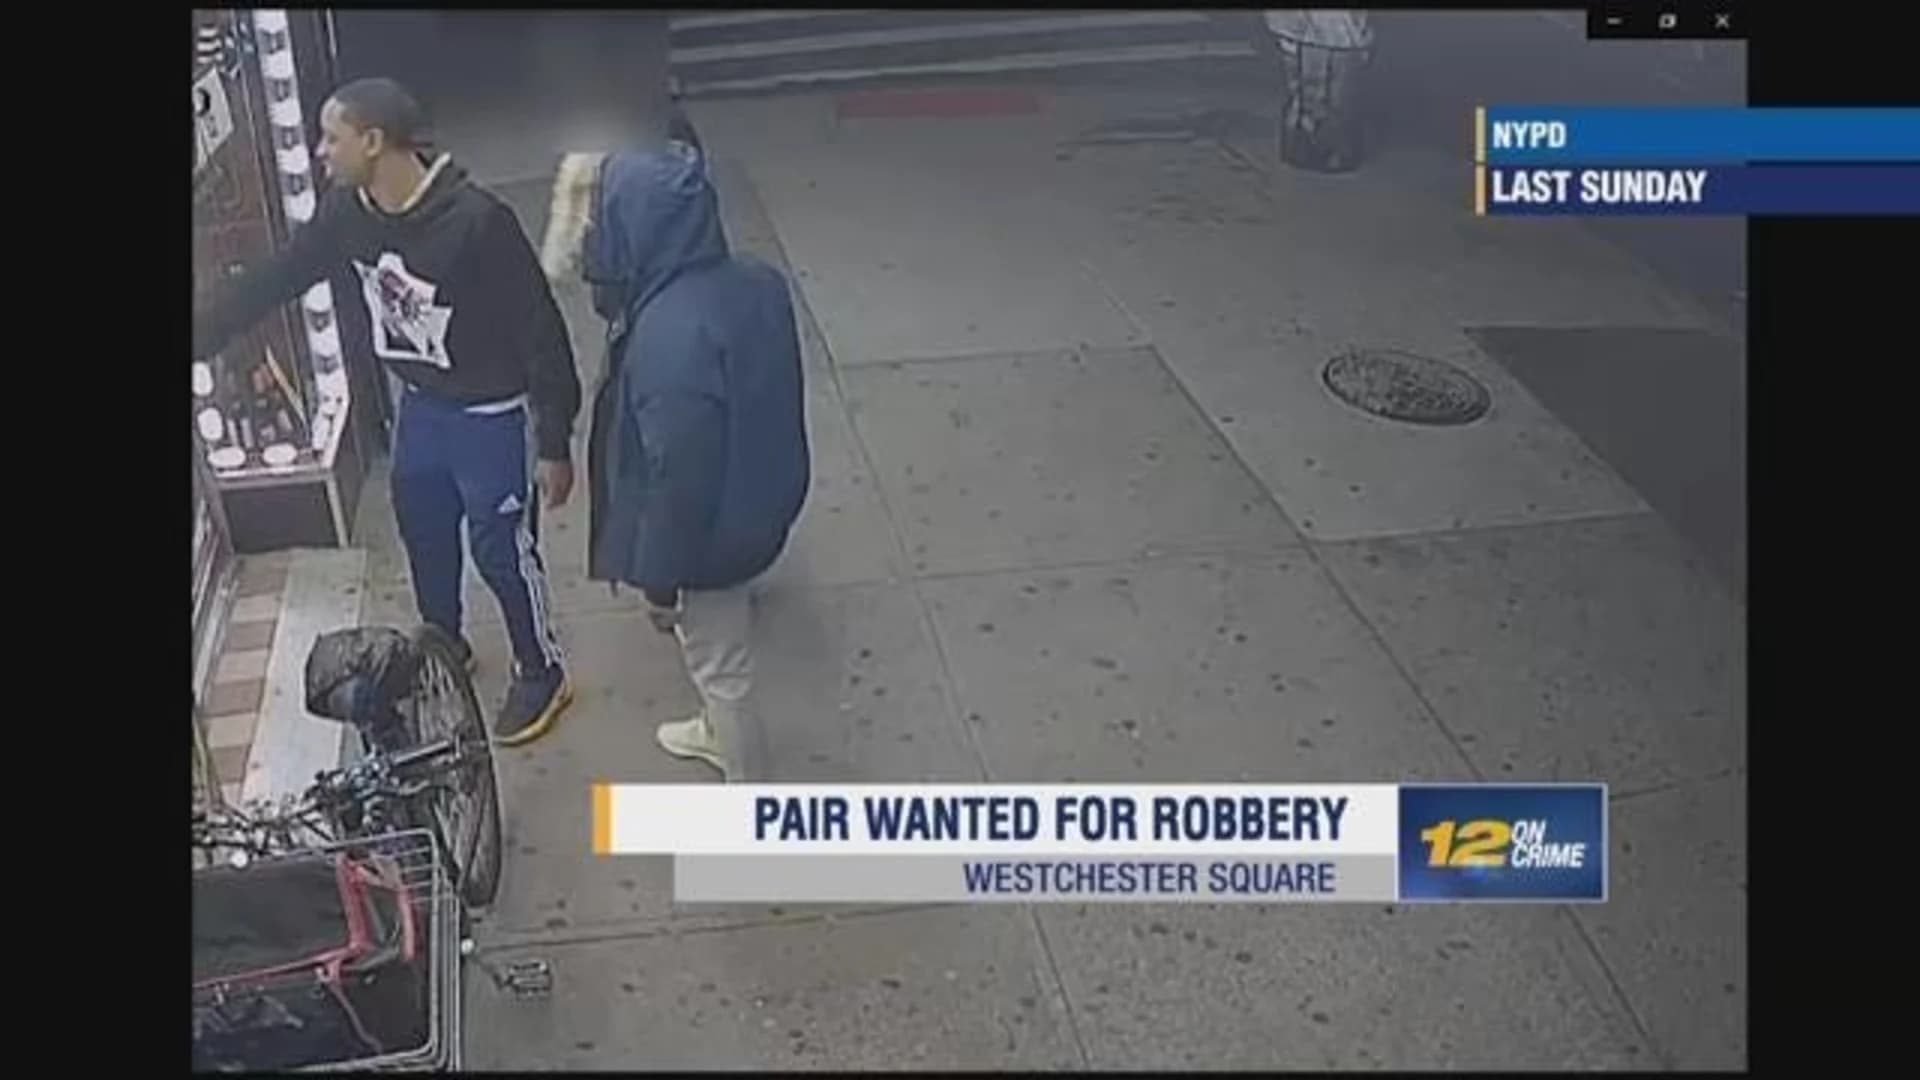 NYPD seeks suspects in Westchester Square robbery